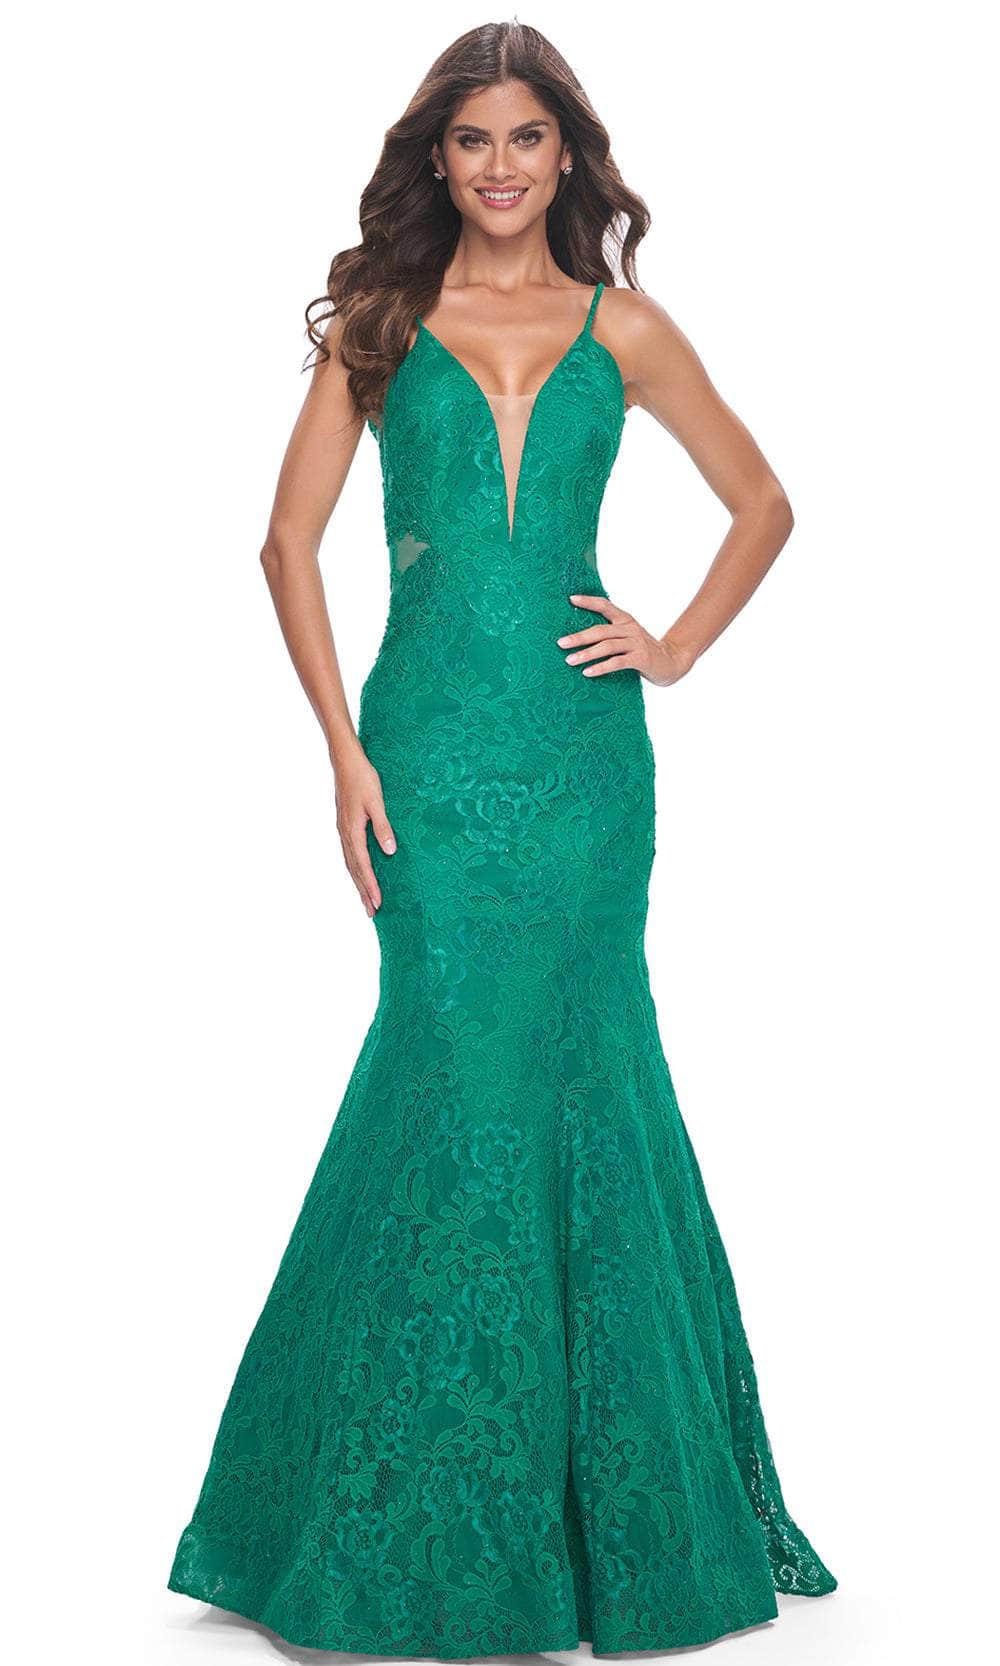 Image of La Femme 32315 - V-Neck Lace Mermaid Prom Gown